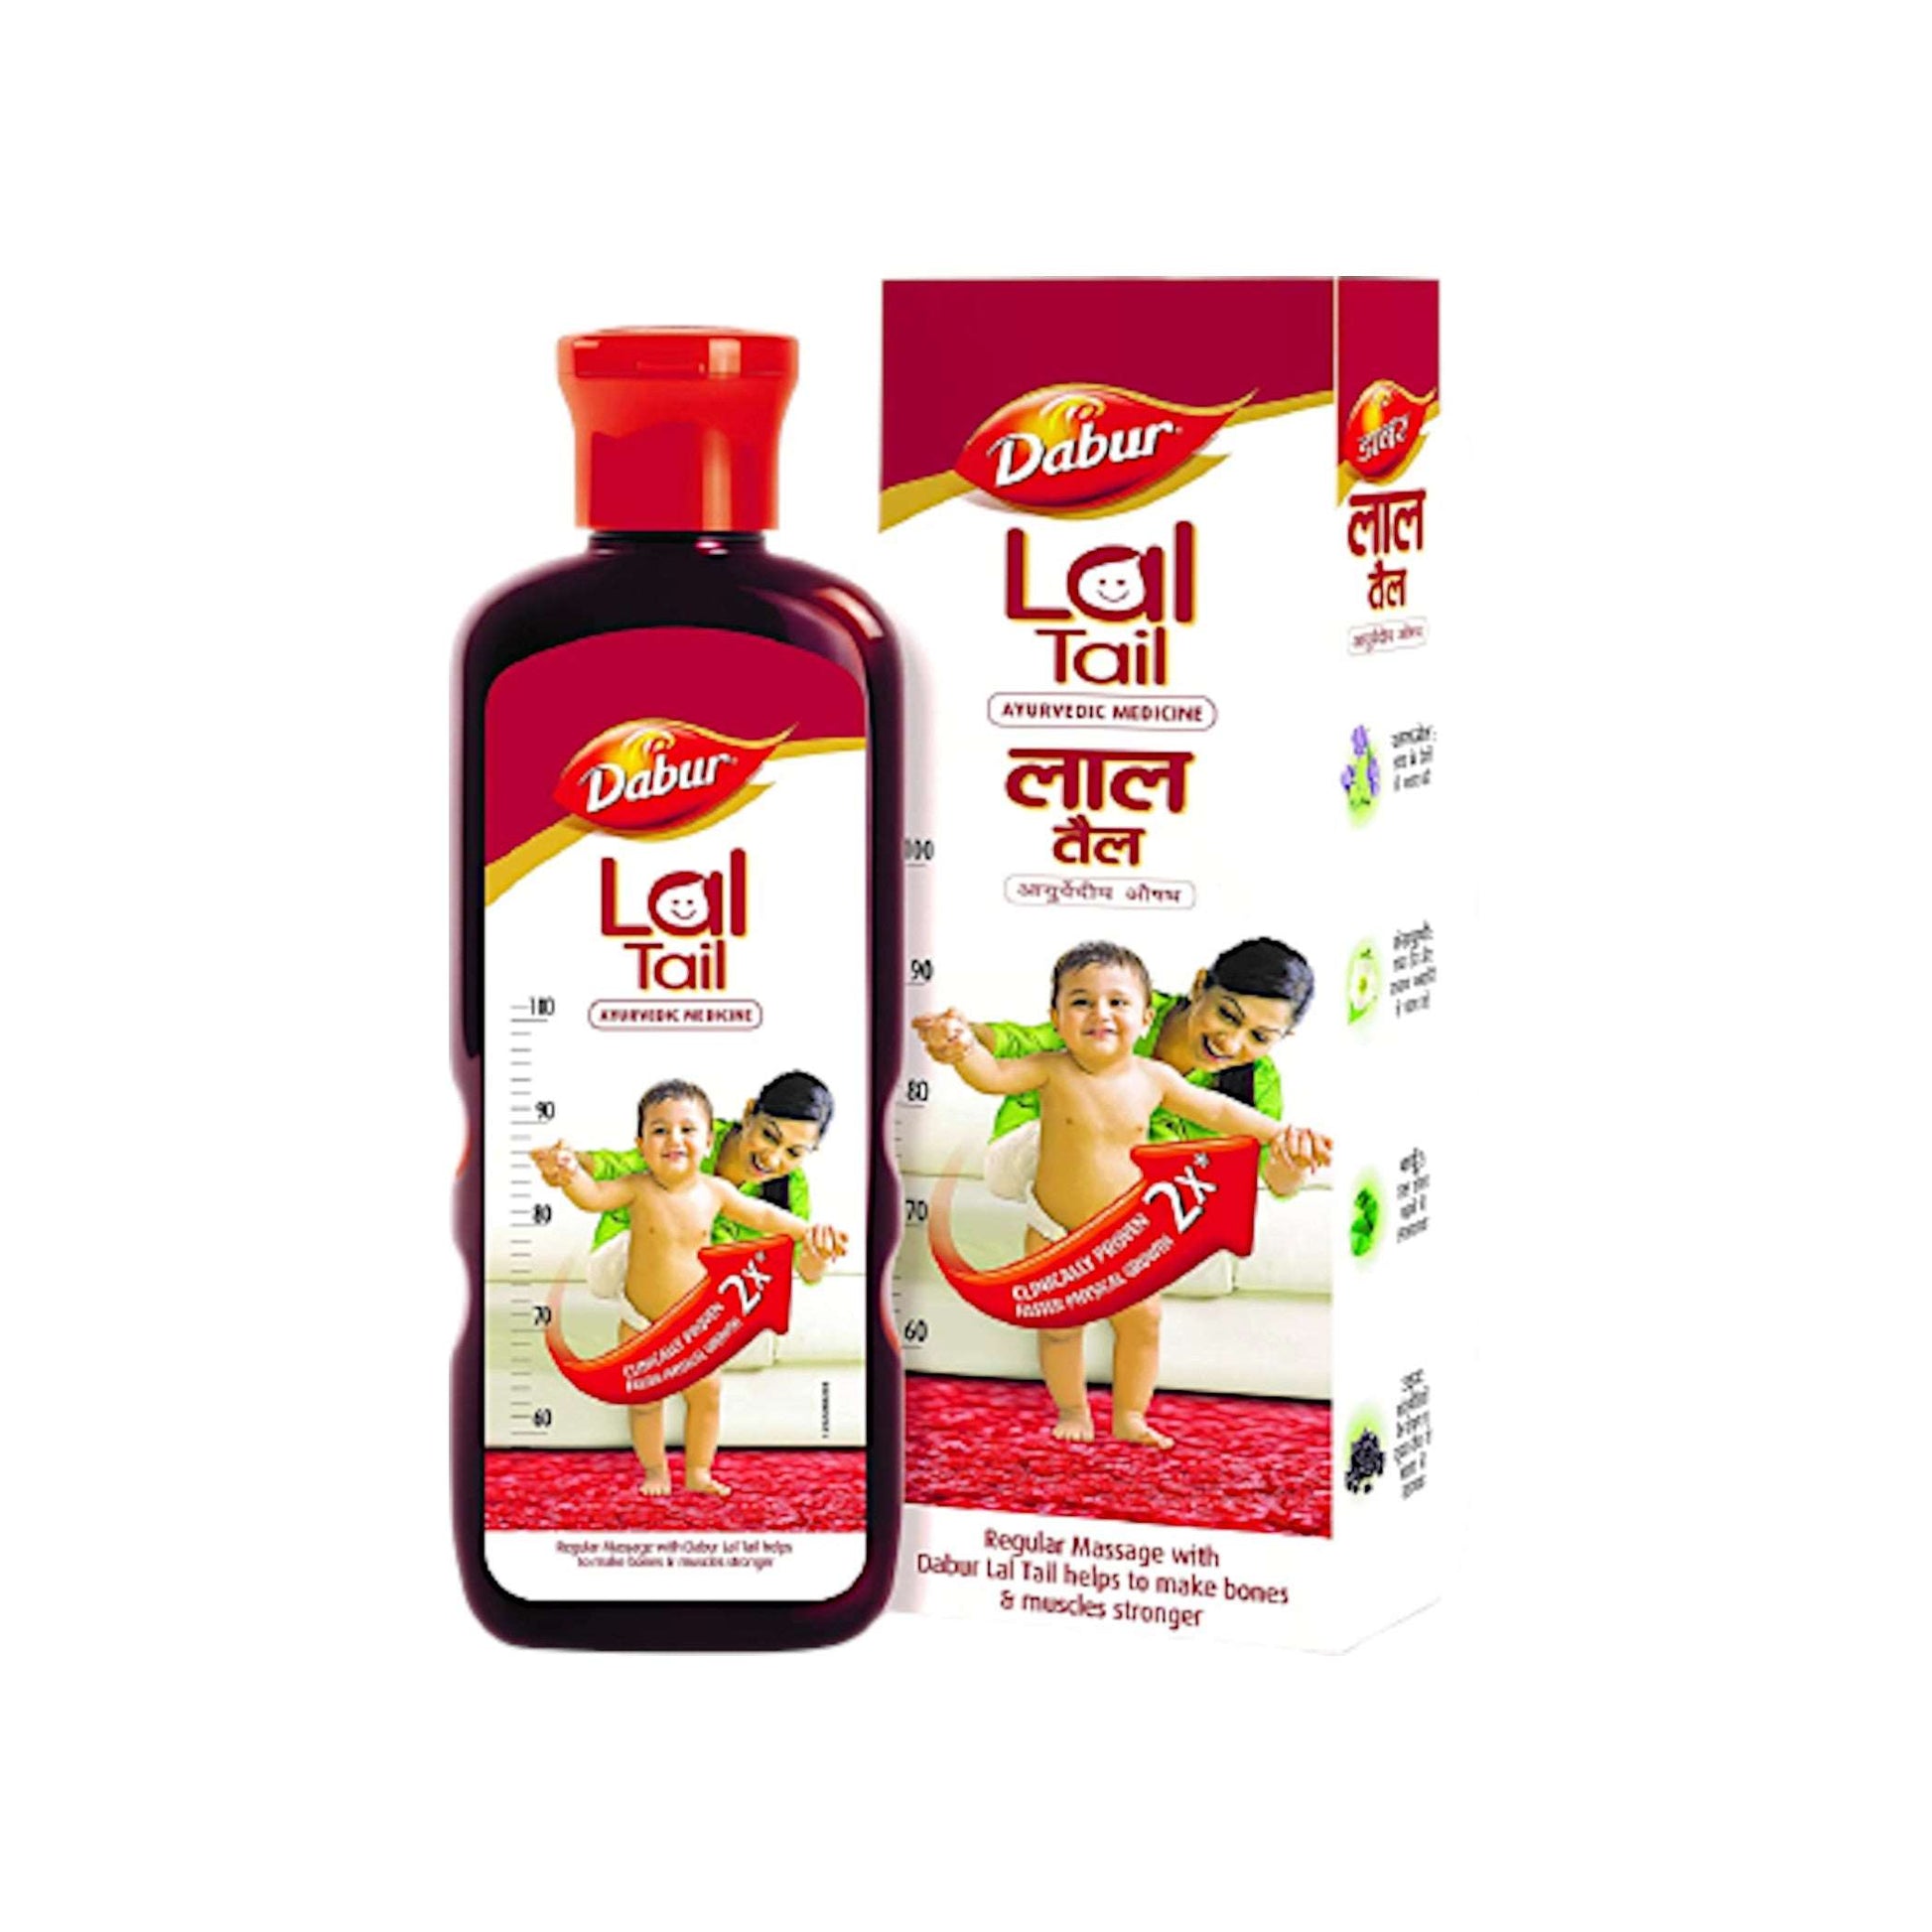 Image of Dabur Lal Tail Baby Massage Oil: Ayurvedic Oil for Babies, Enhancing Growth and Sleep.